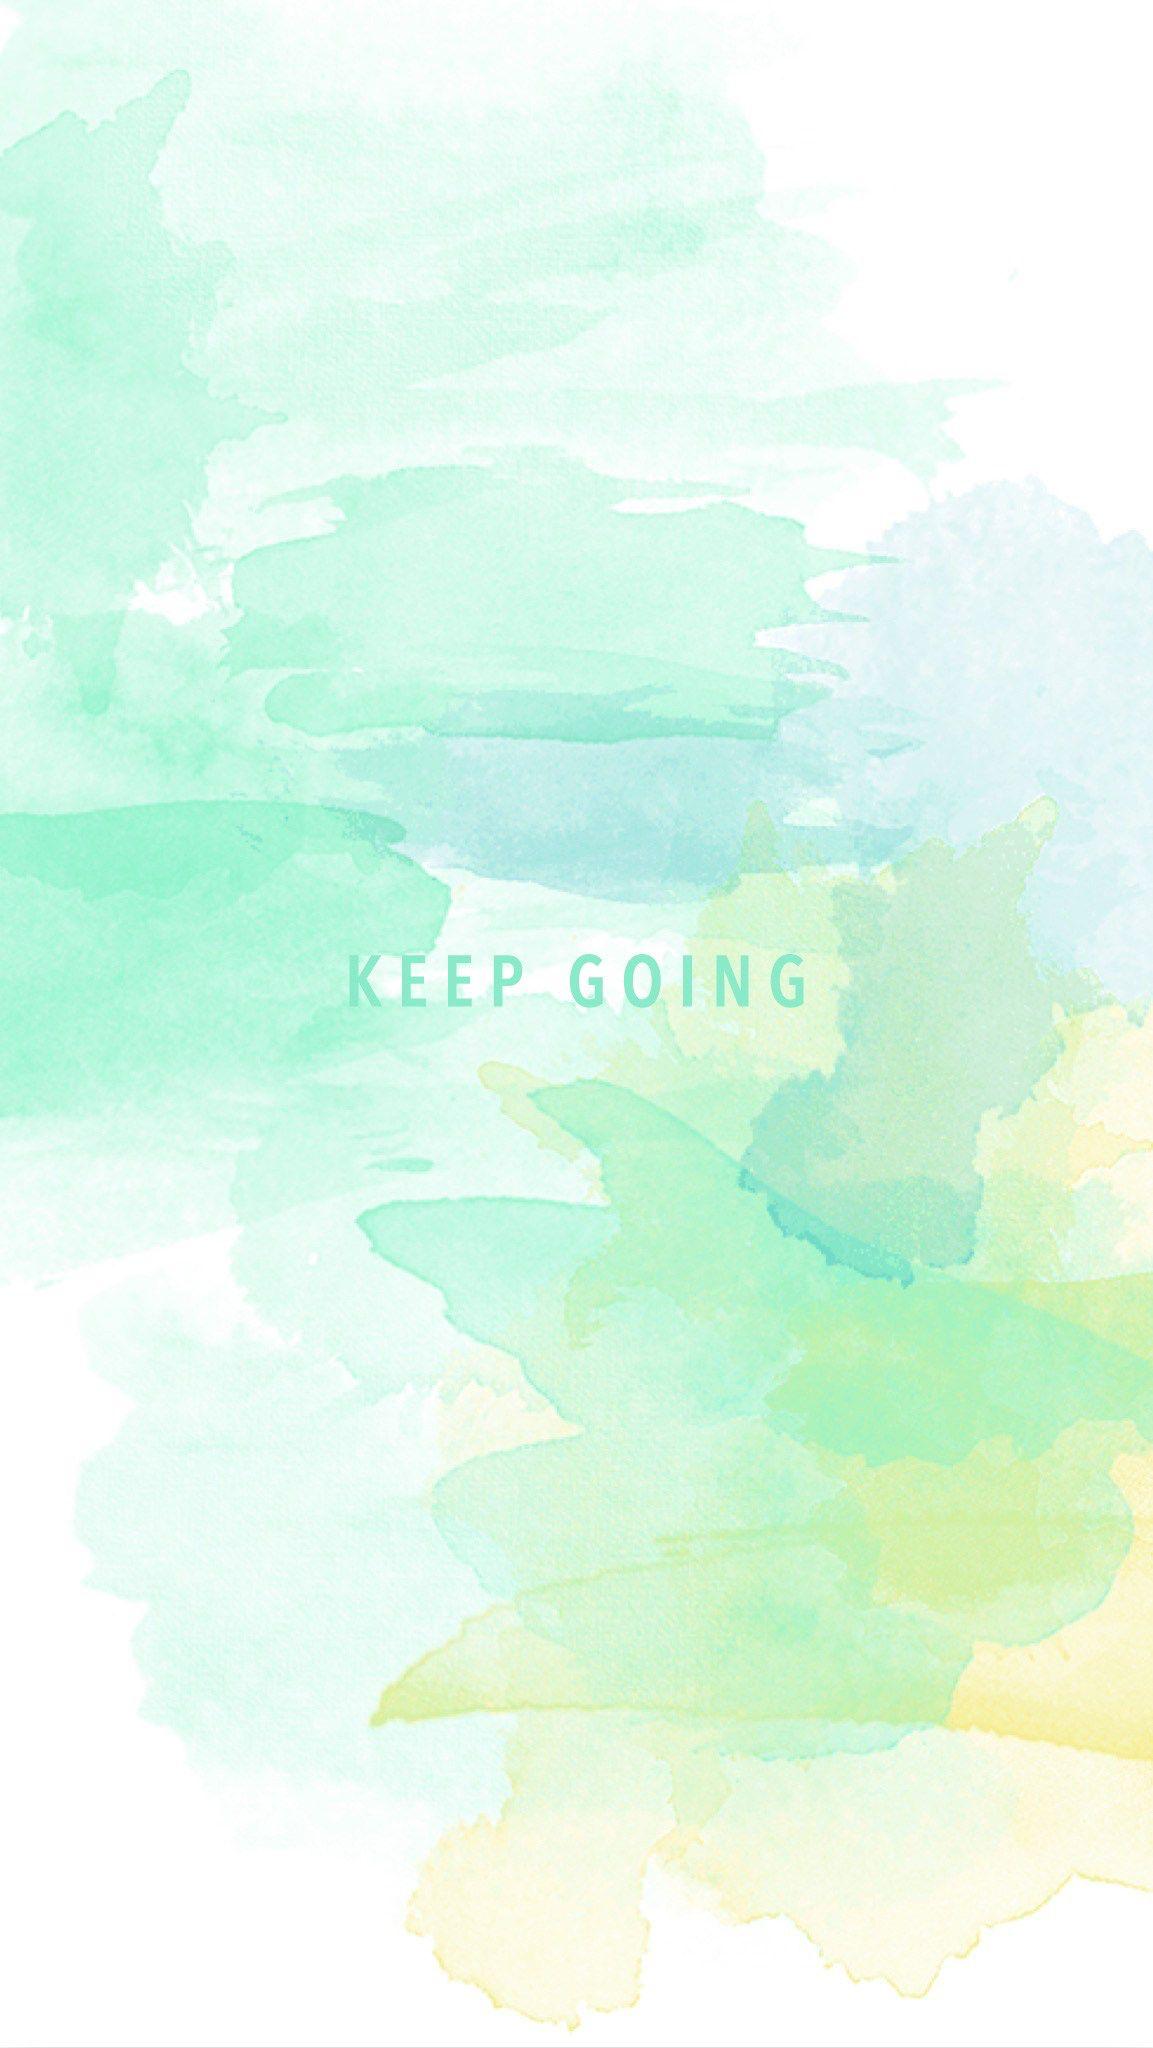 Keep going. Free phone wallpaper, Watercolor typography